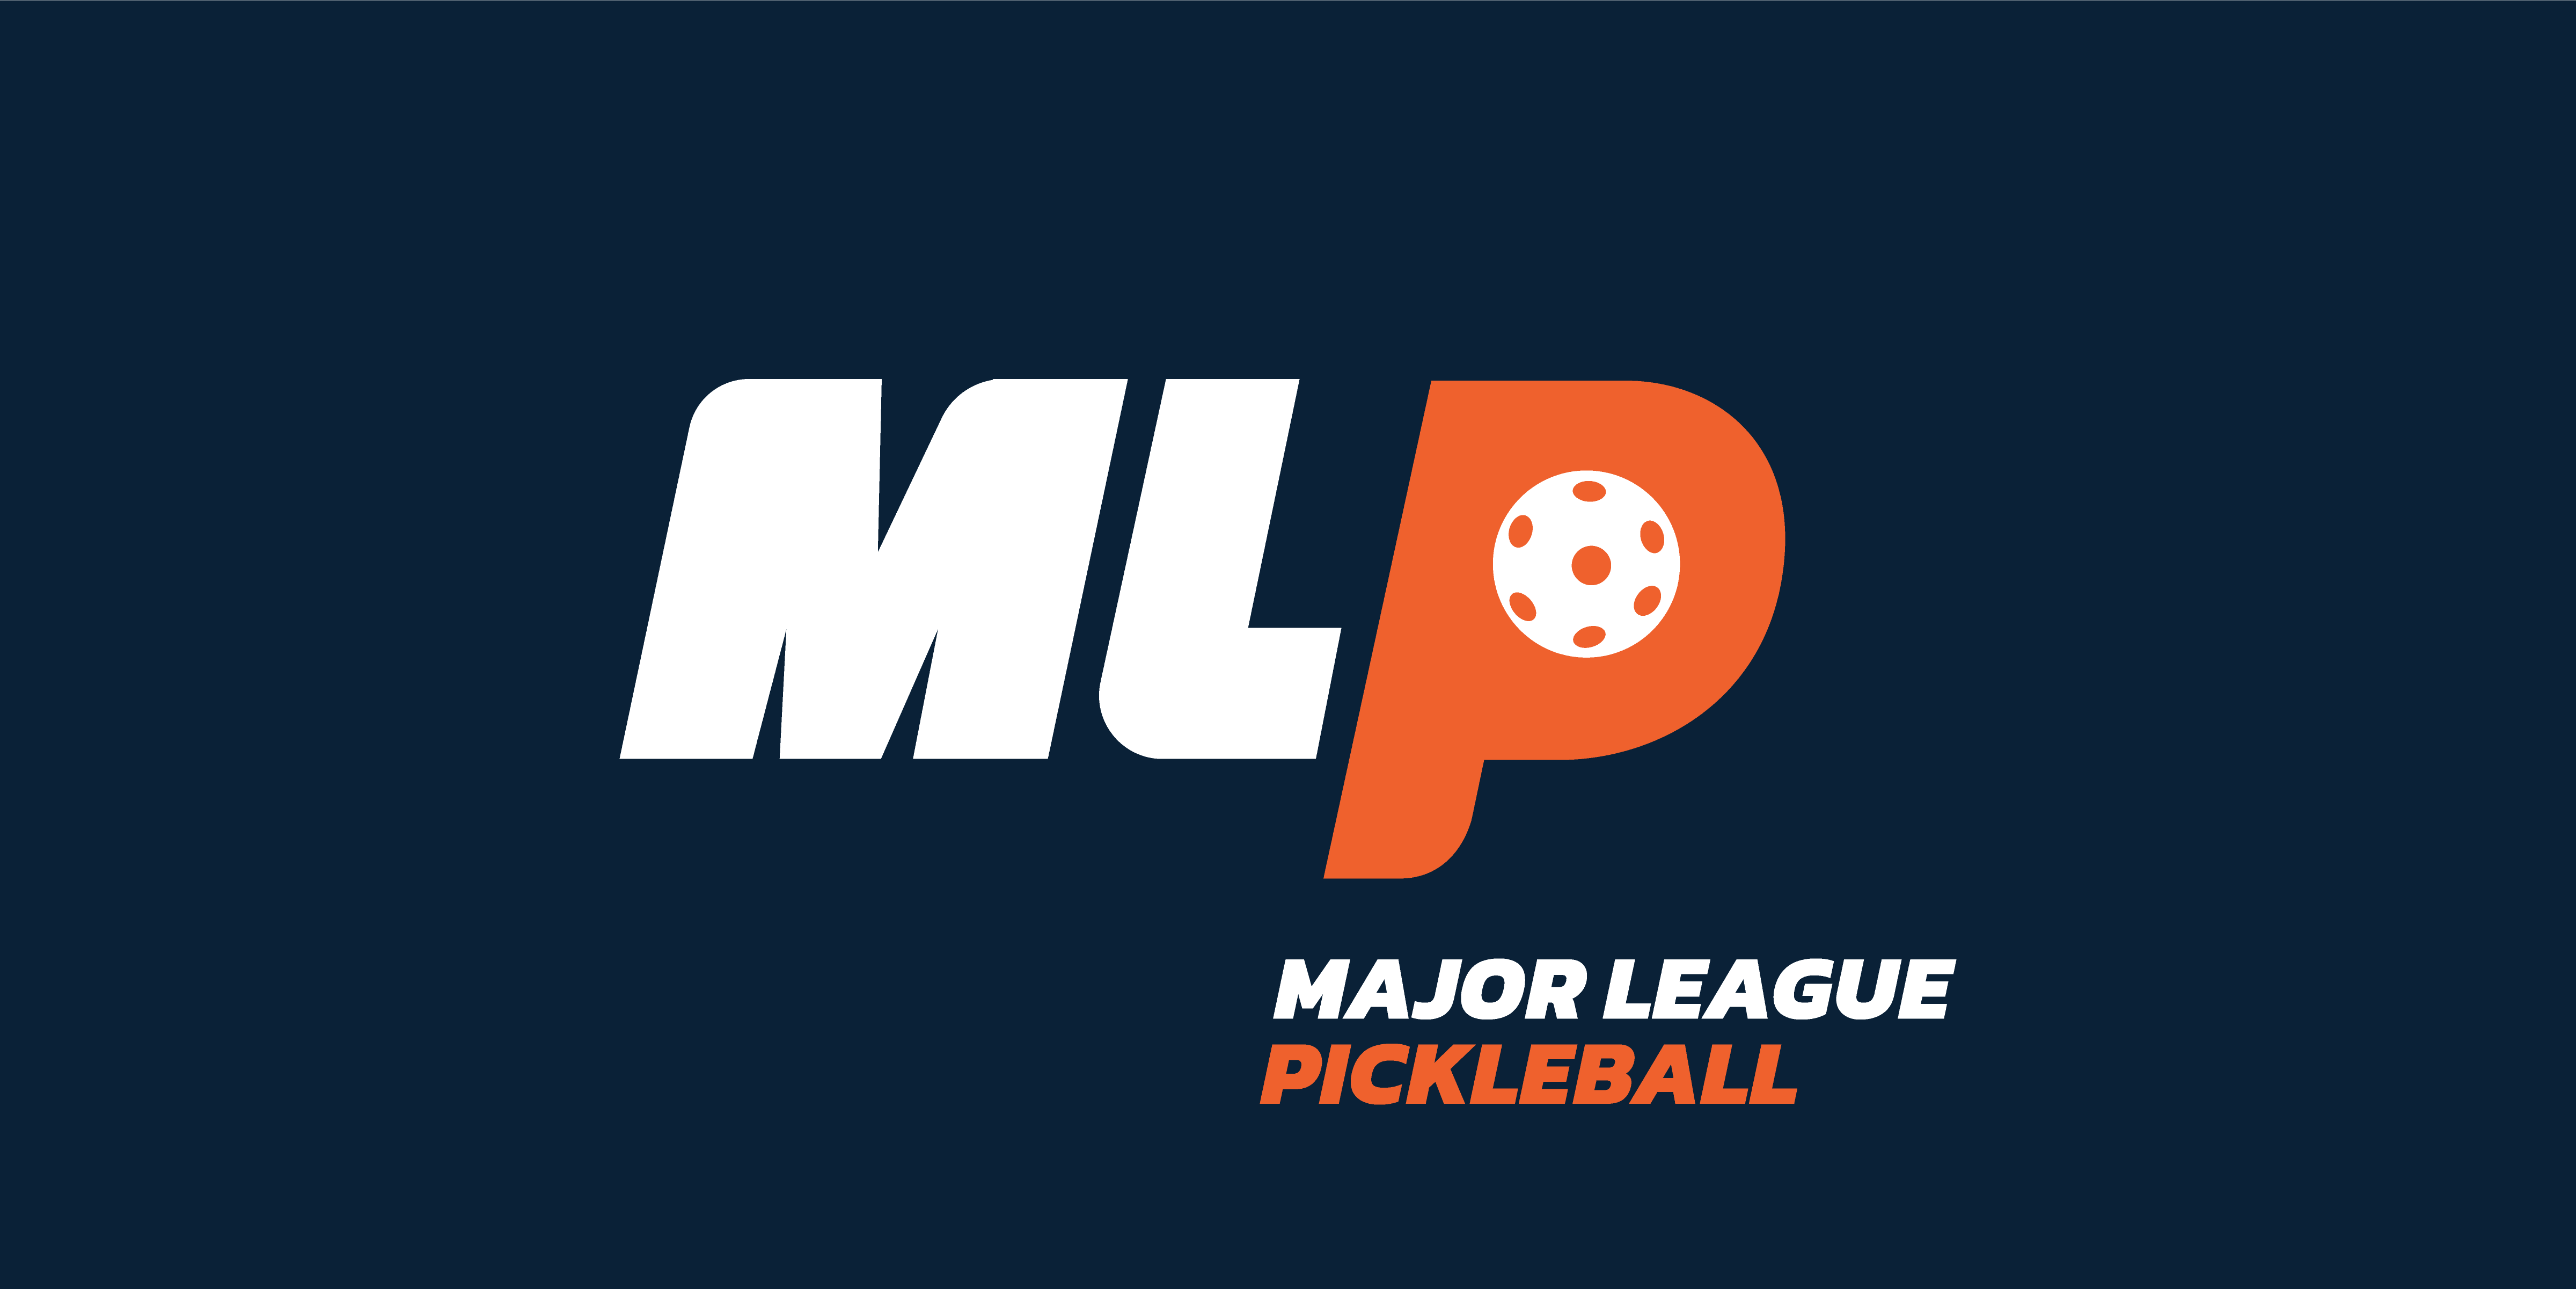 Competition Heats Up in Professional Pickleball: Major League Pickleball’s “Mic Drop” Announcement & the PPA Tour’s Response | Pickler Pickleball